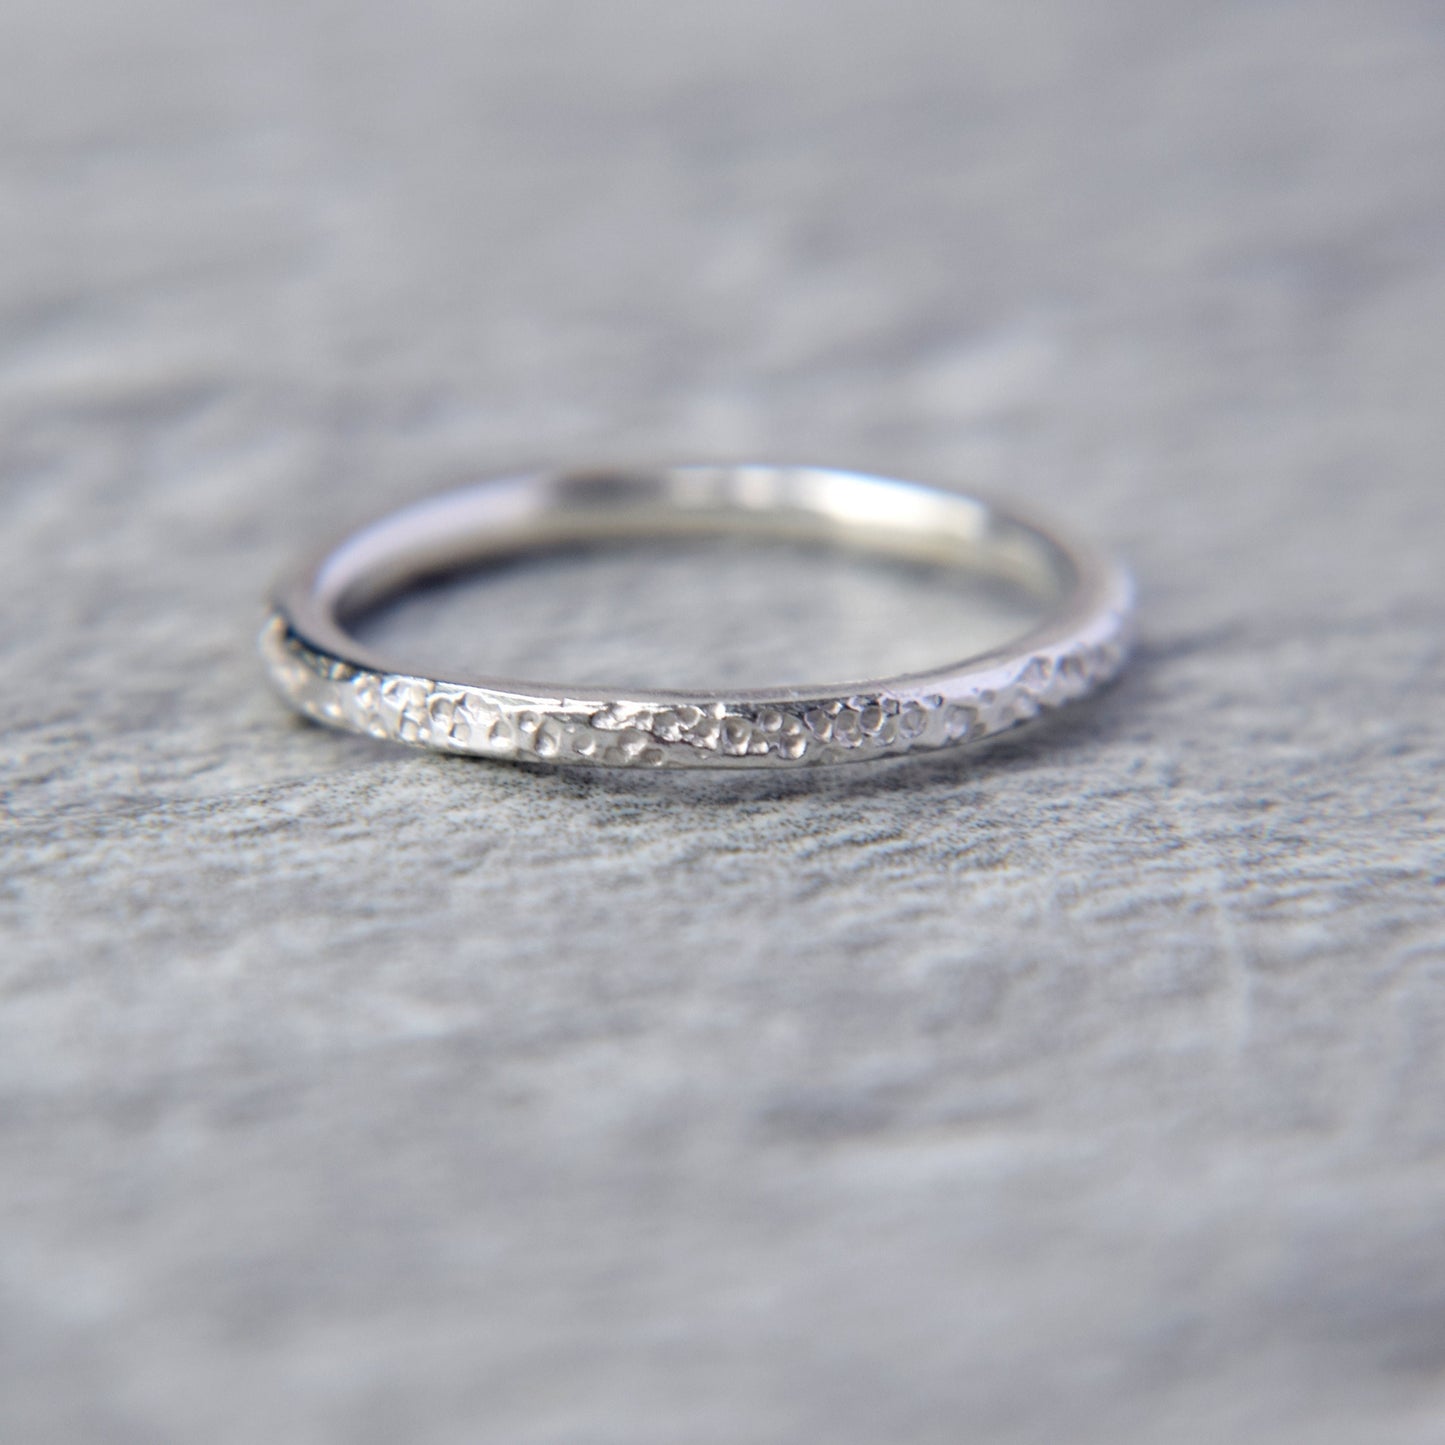 Silver Lichen Stacking Ring